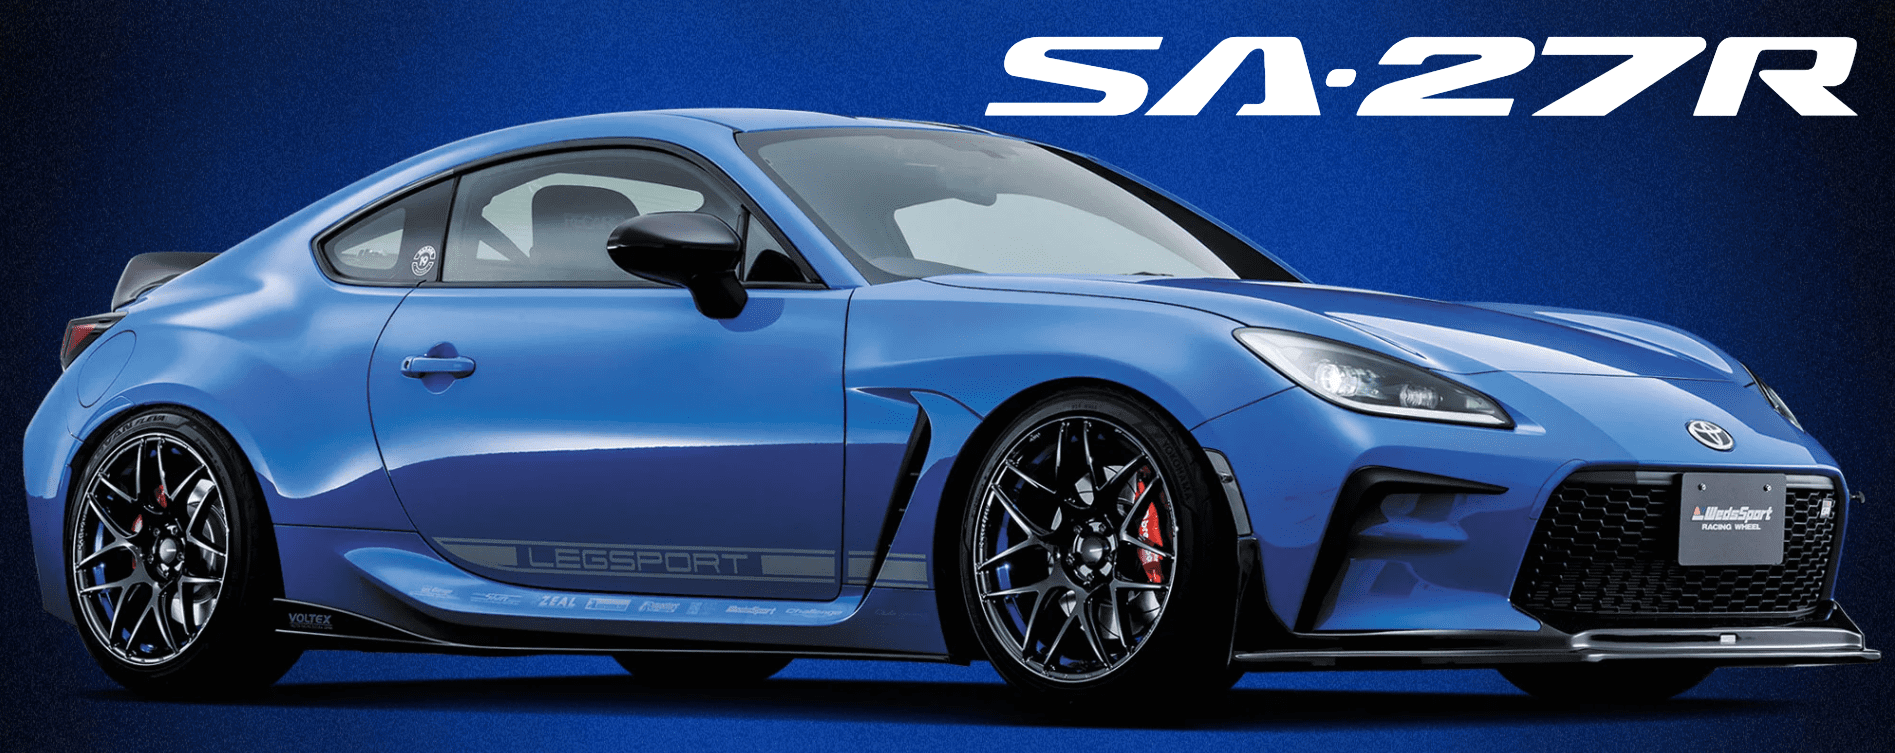 The toyota sa - rr is shown on a blue background.